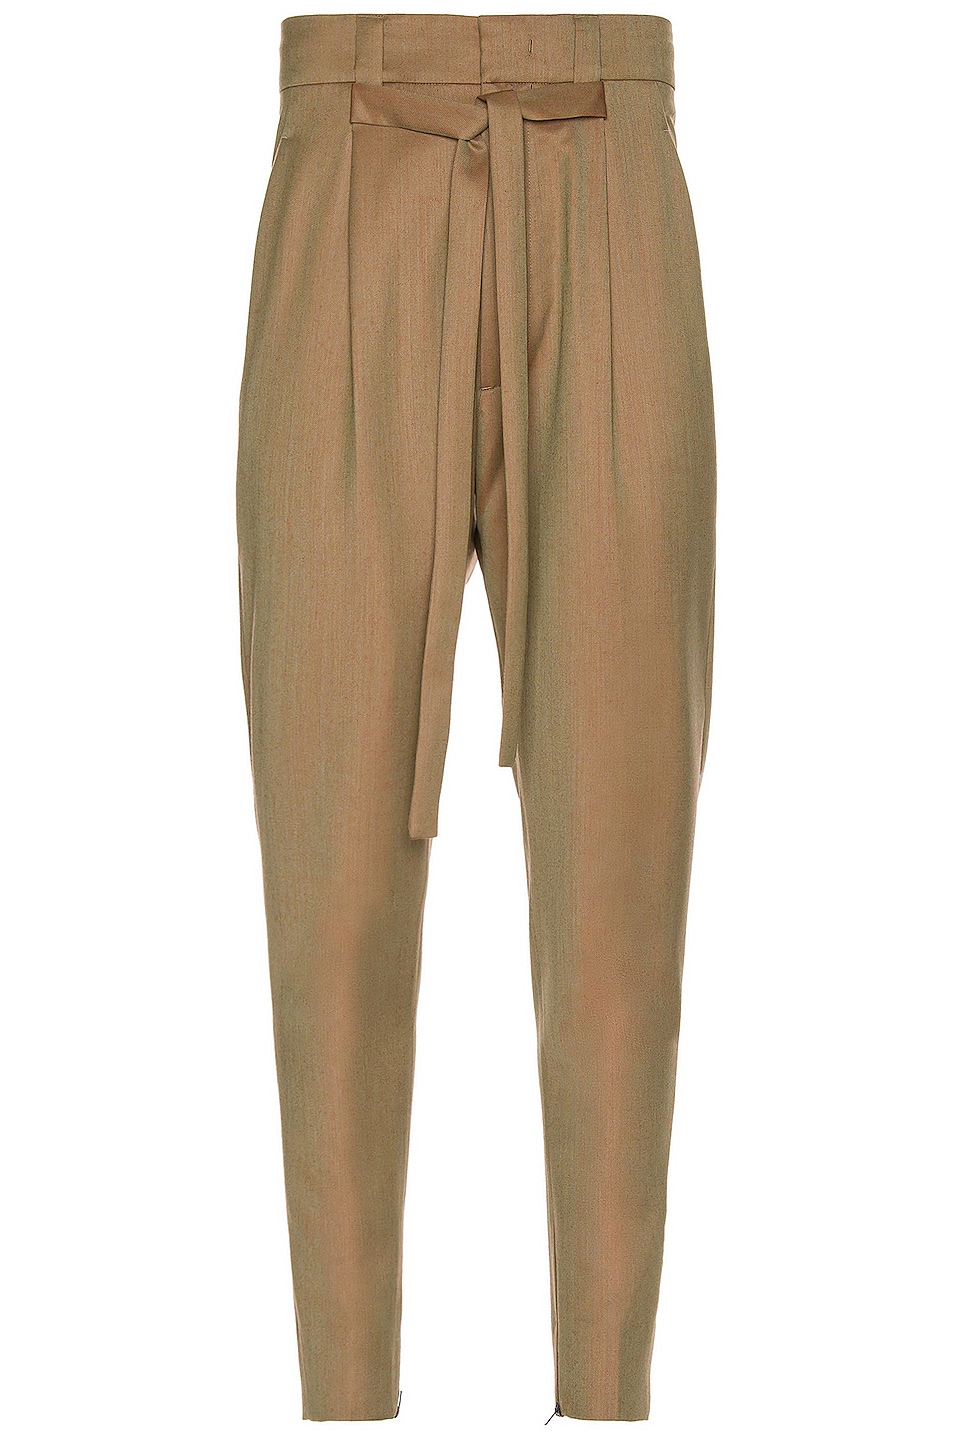 Image 1 of Fear of God Slim Trouser in Iridescent Beige